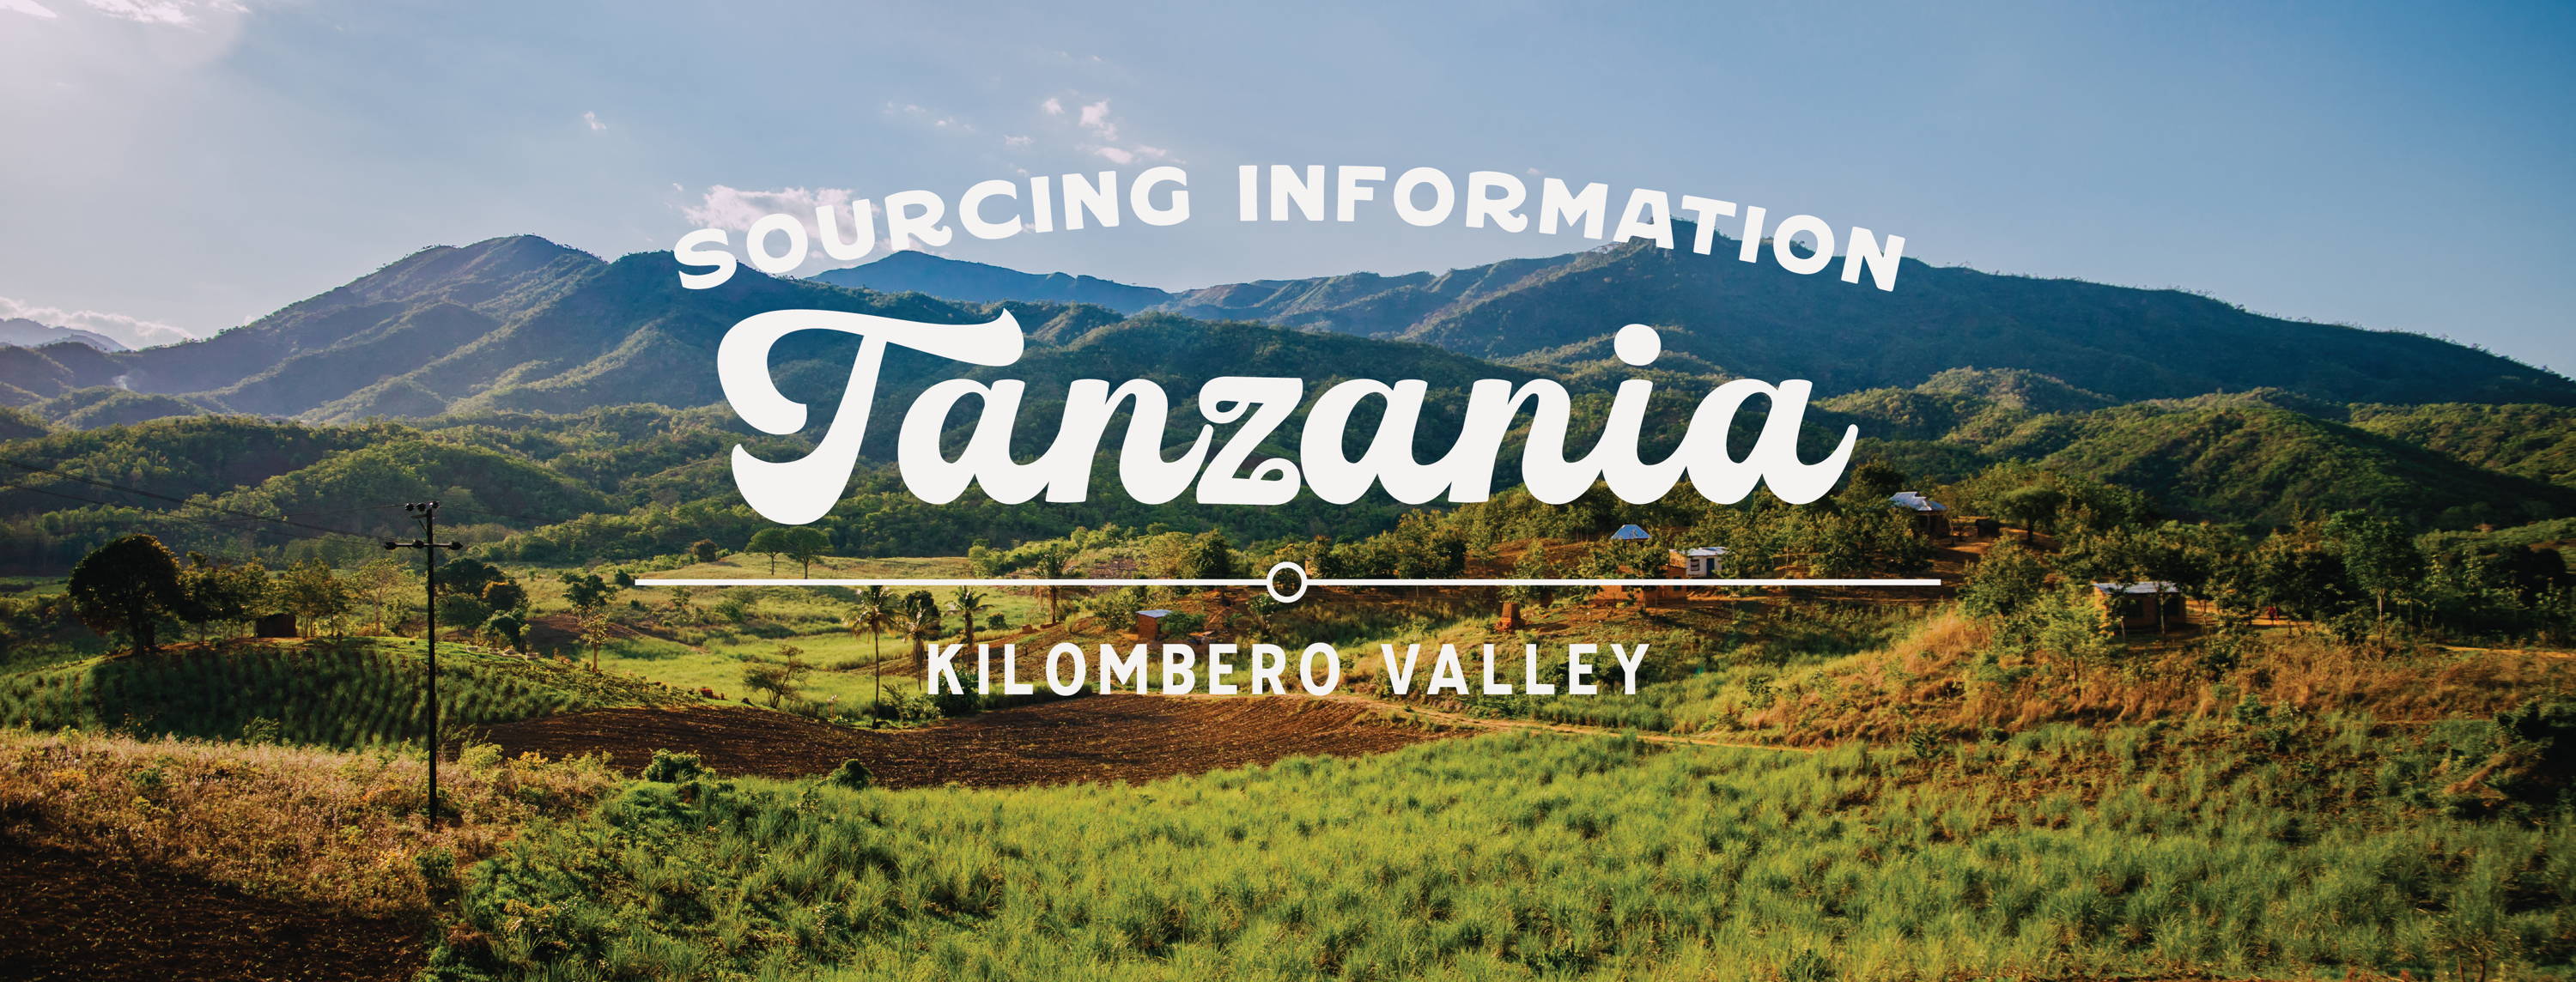 Photo of Taznzania Kilombero Valley for Sourcing Page